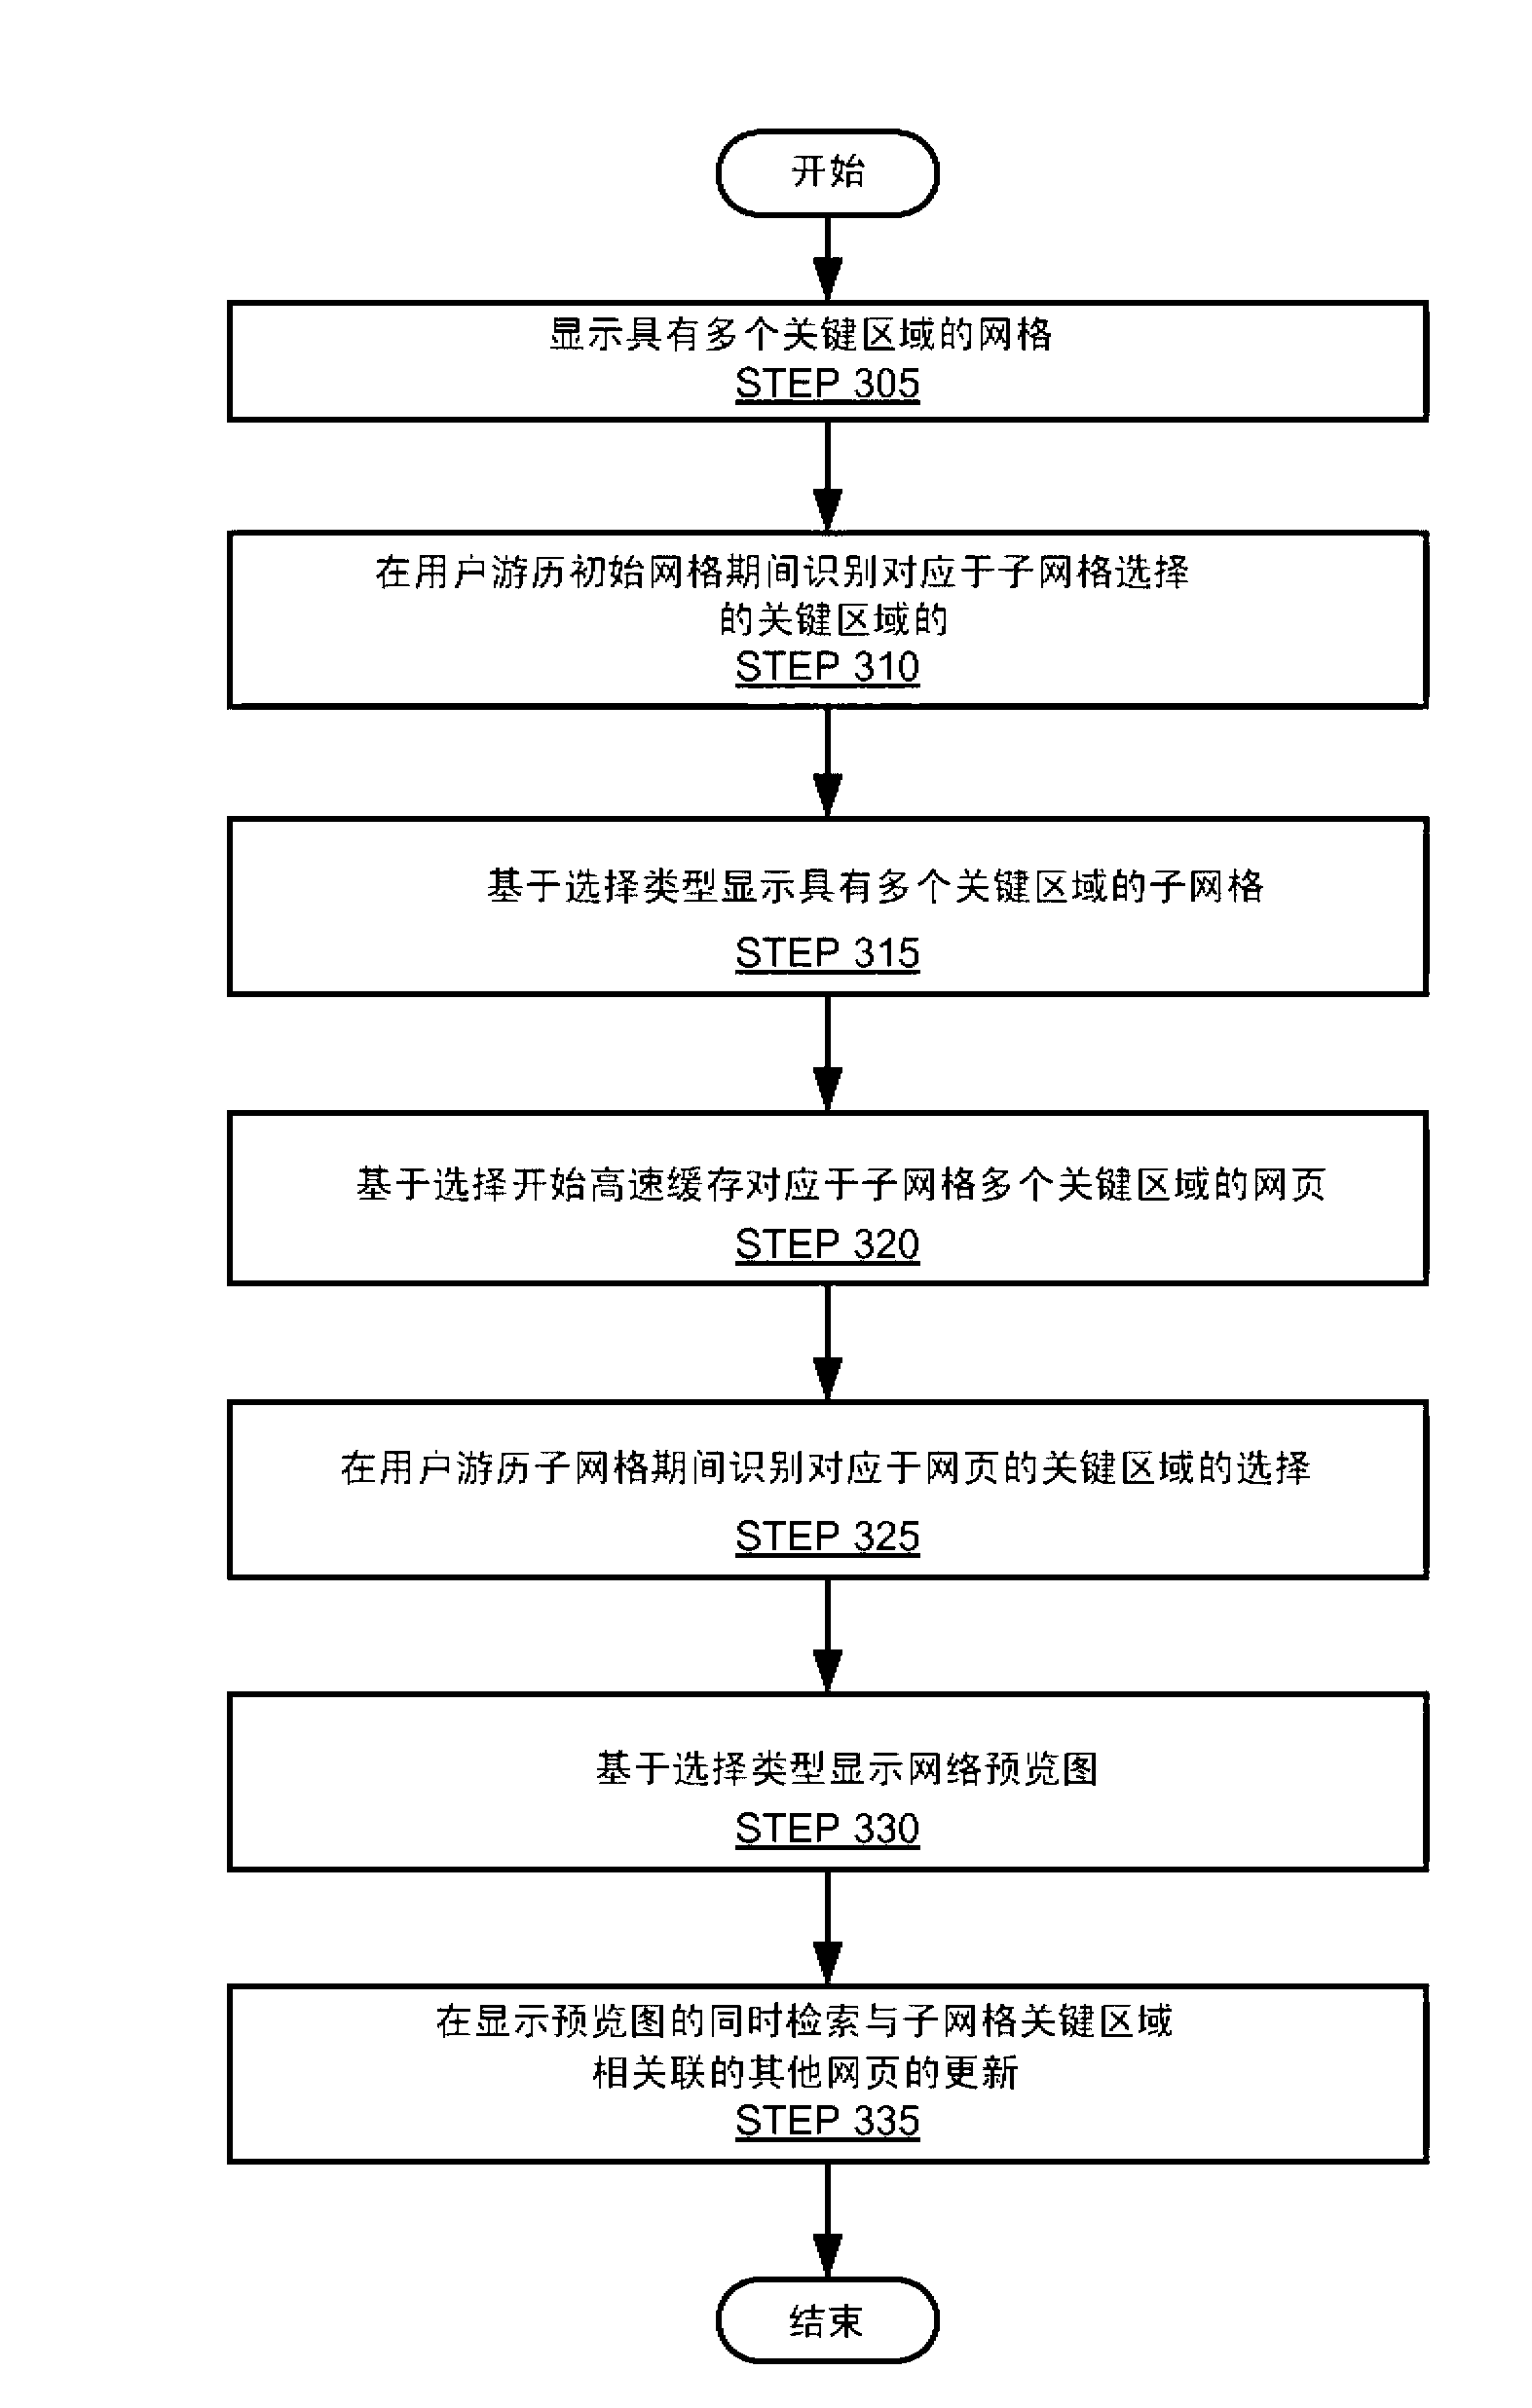 Method and system for organizing information with a sharable user interface